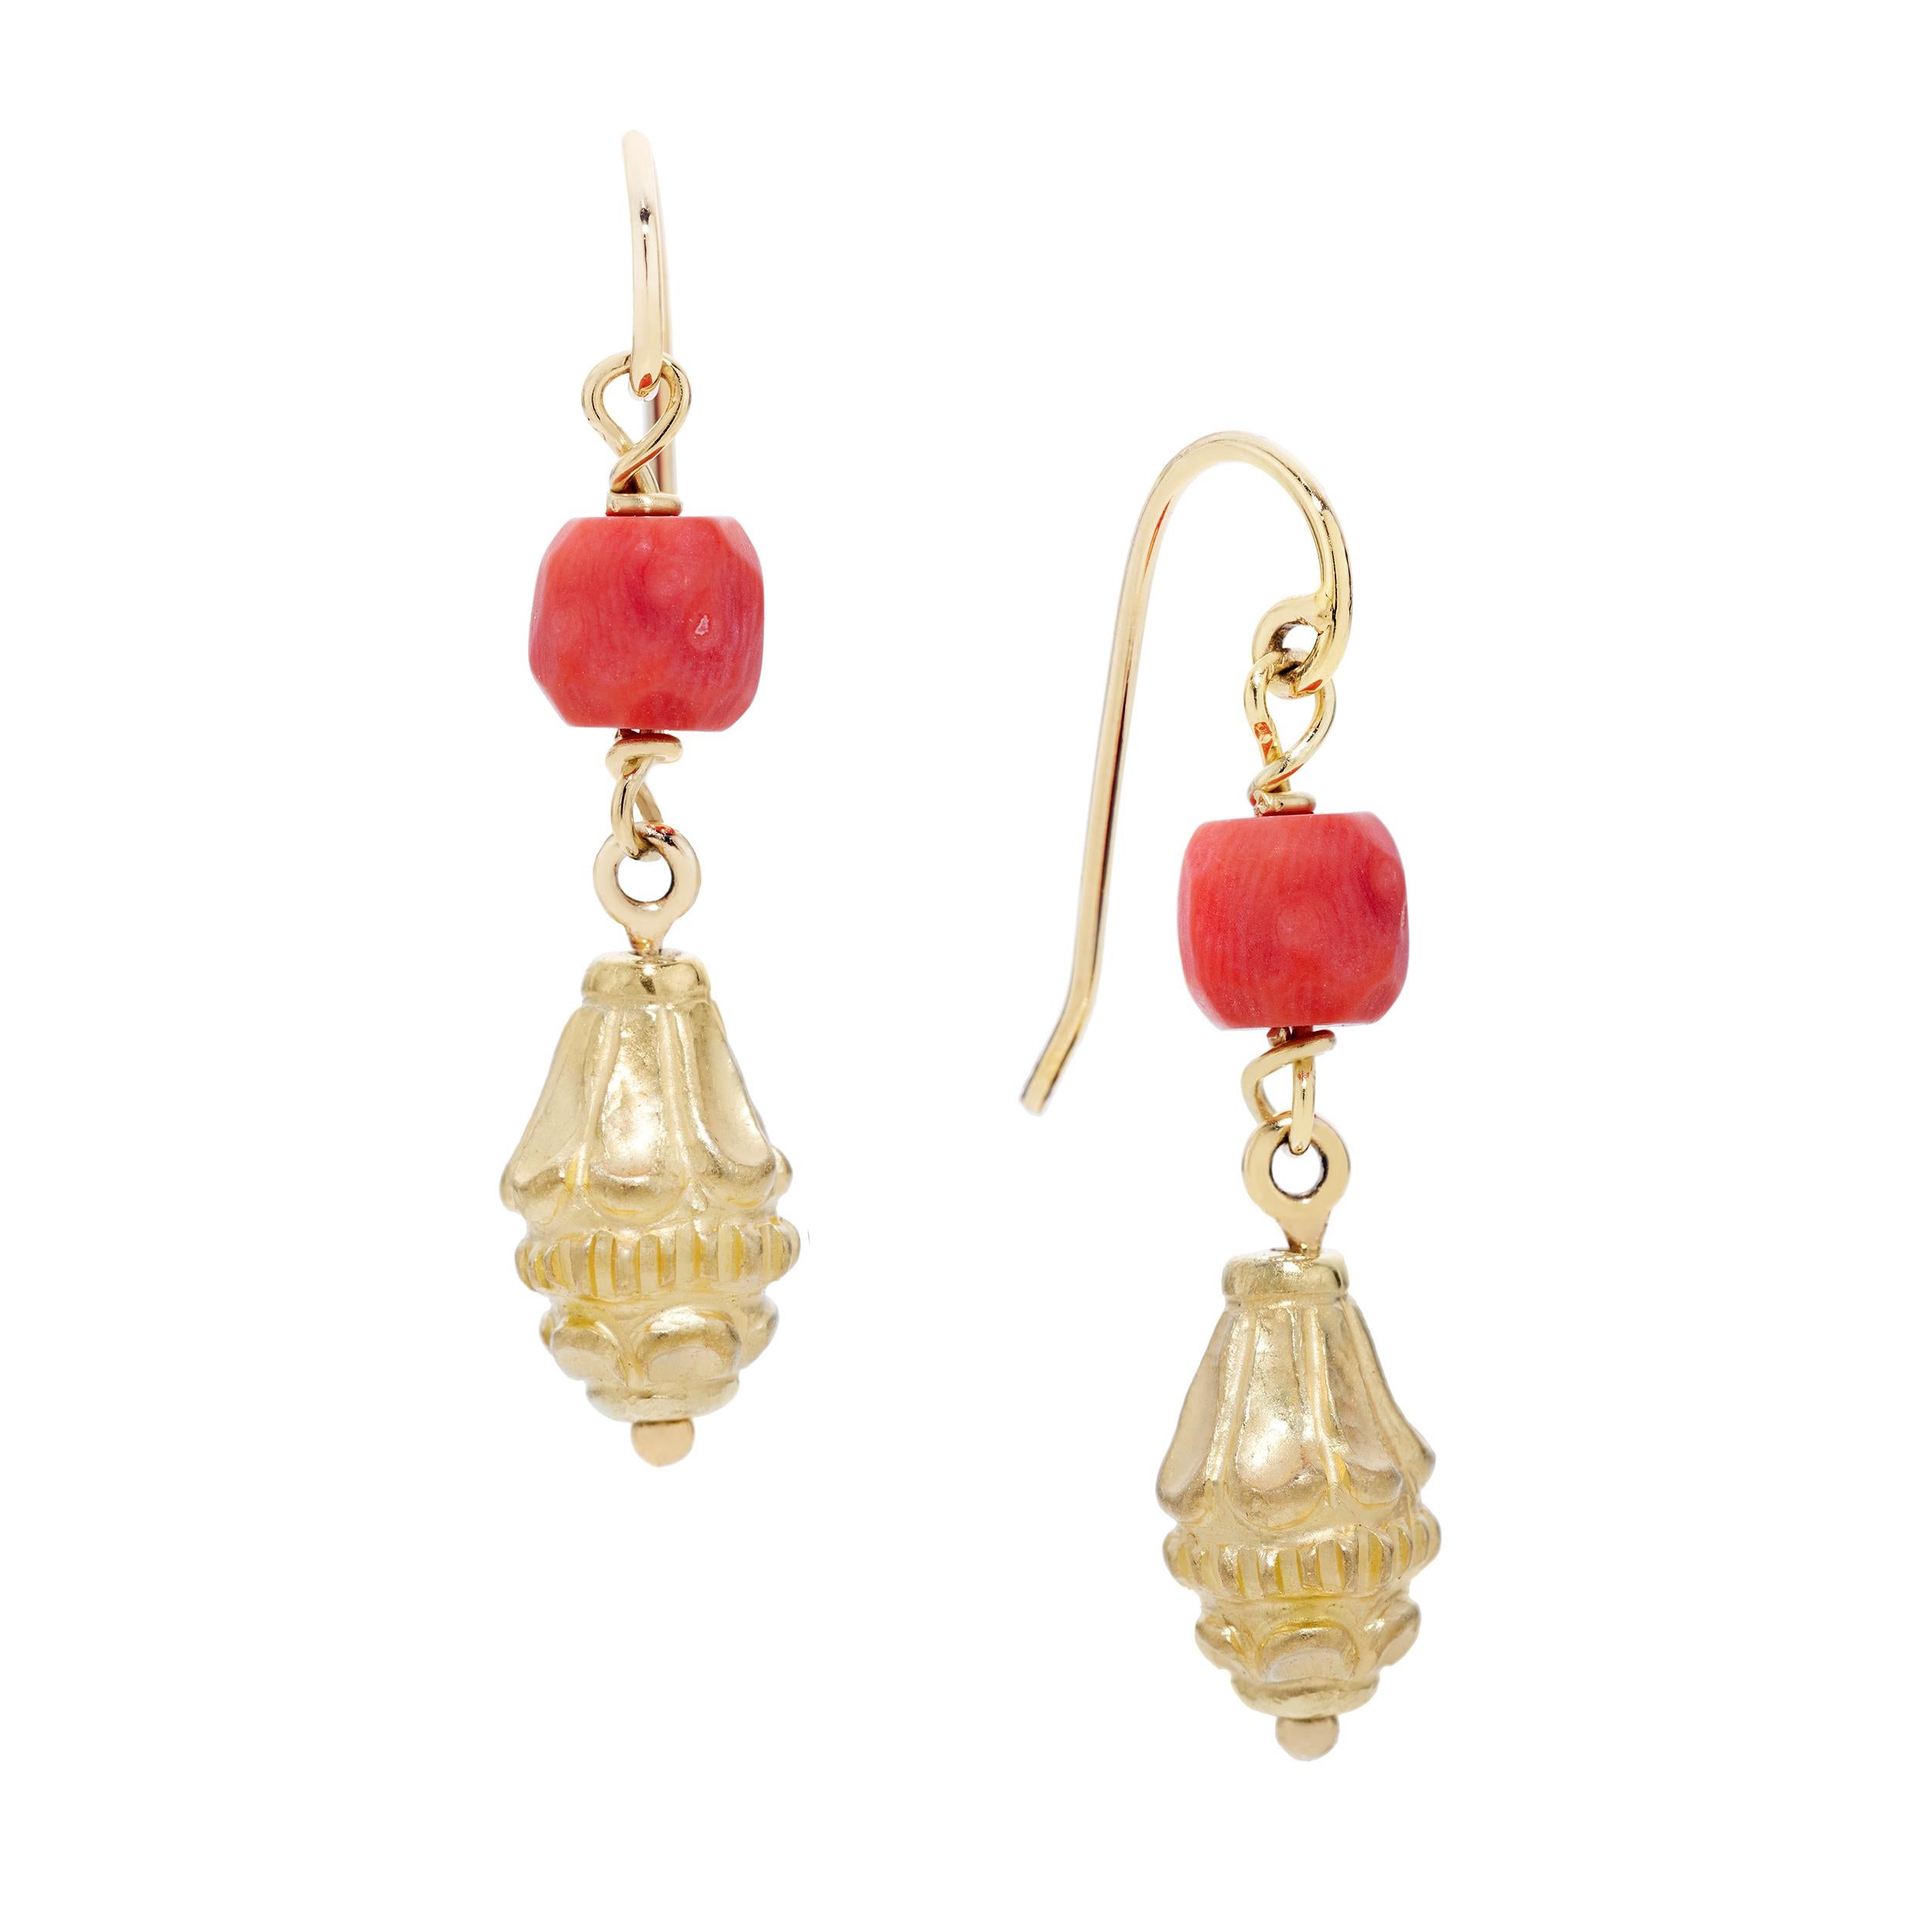 These earrings were created to coordinate with an incredible signed necklace that can be found on another listing.  The Vintage Salmon-colored faceted barrel-shape Coral Beads are approximately 6.5 mm in width and 6.15 mm in length.  The designer